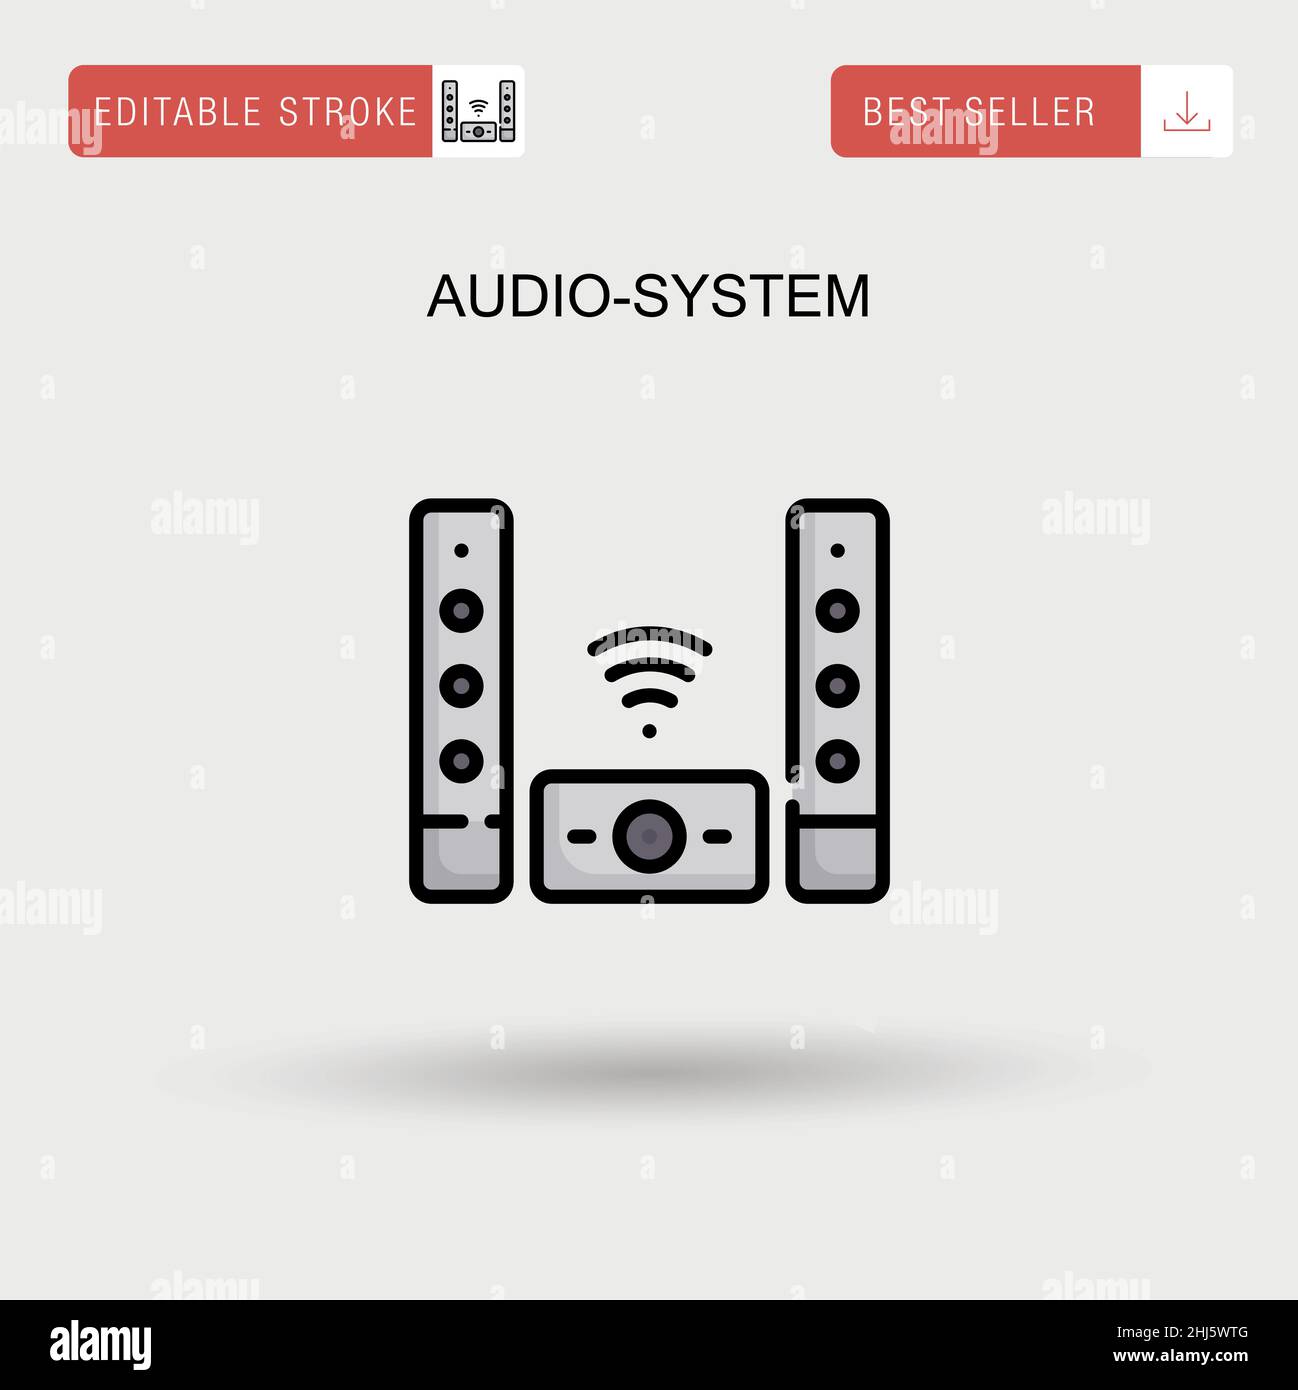 Audio-system Simple vector icon. Stock Vector